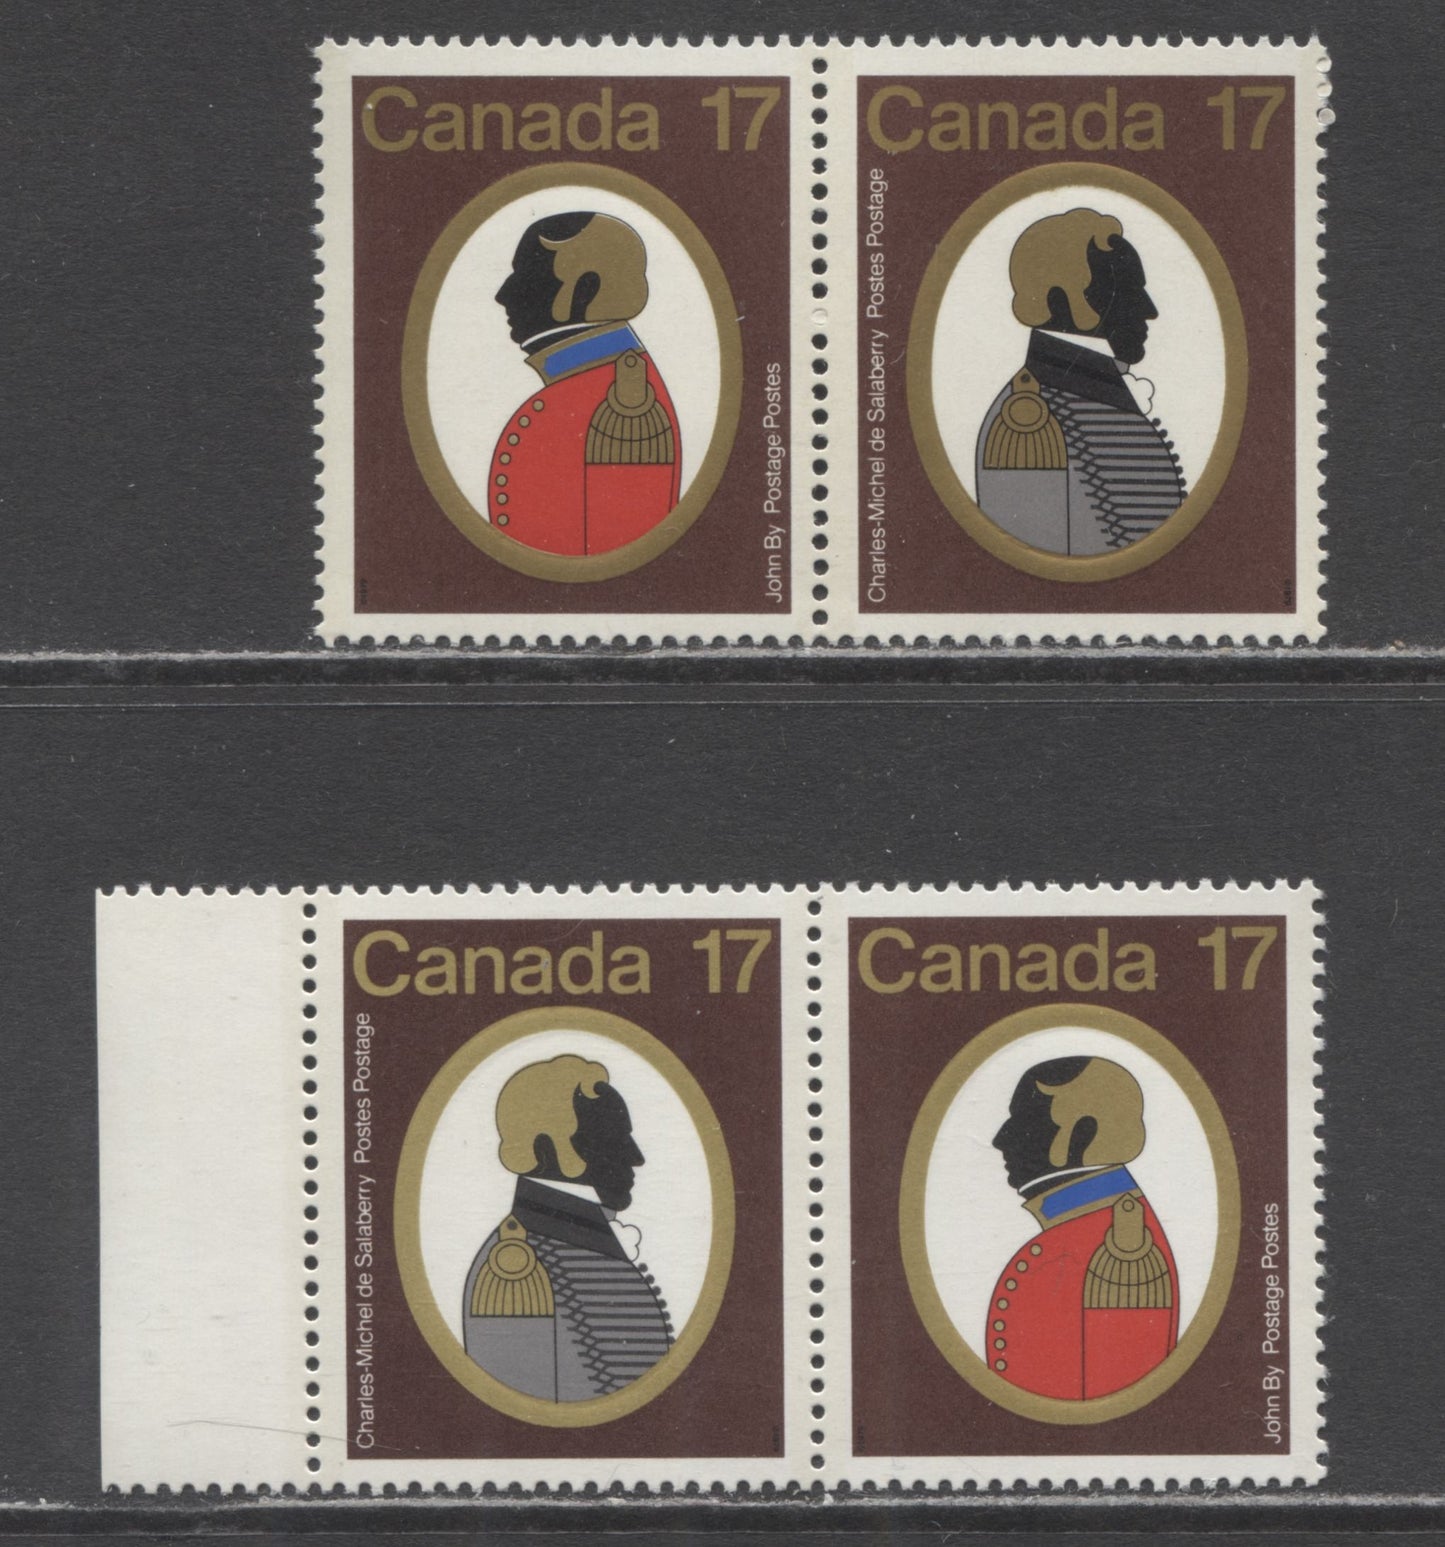 Lot 456 Canada #820avar 17c Multicolored Colonel C.M de Salaberry & Colonel John By, 1979 Canadian Colonels Issue, 2 VFNH Pairs With Yellow Gold Instead Of Normal Deep Gold & Fluorescent Ink On John By's Uniform, Normal For Comparison